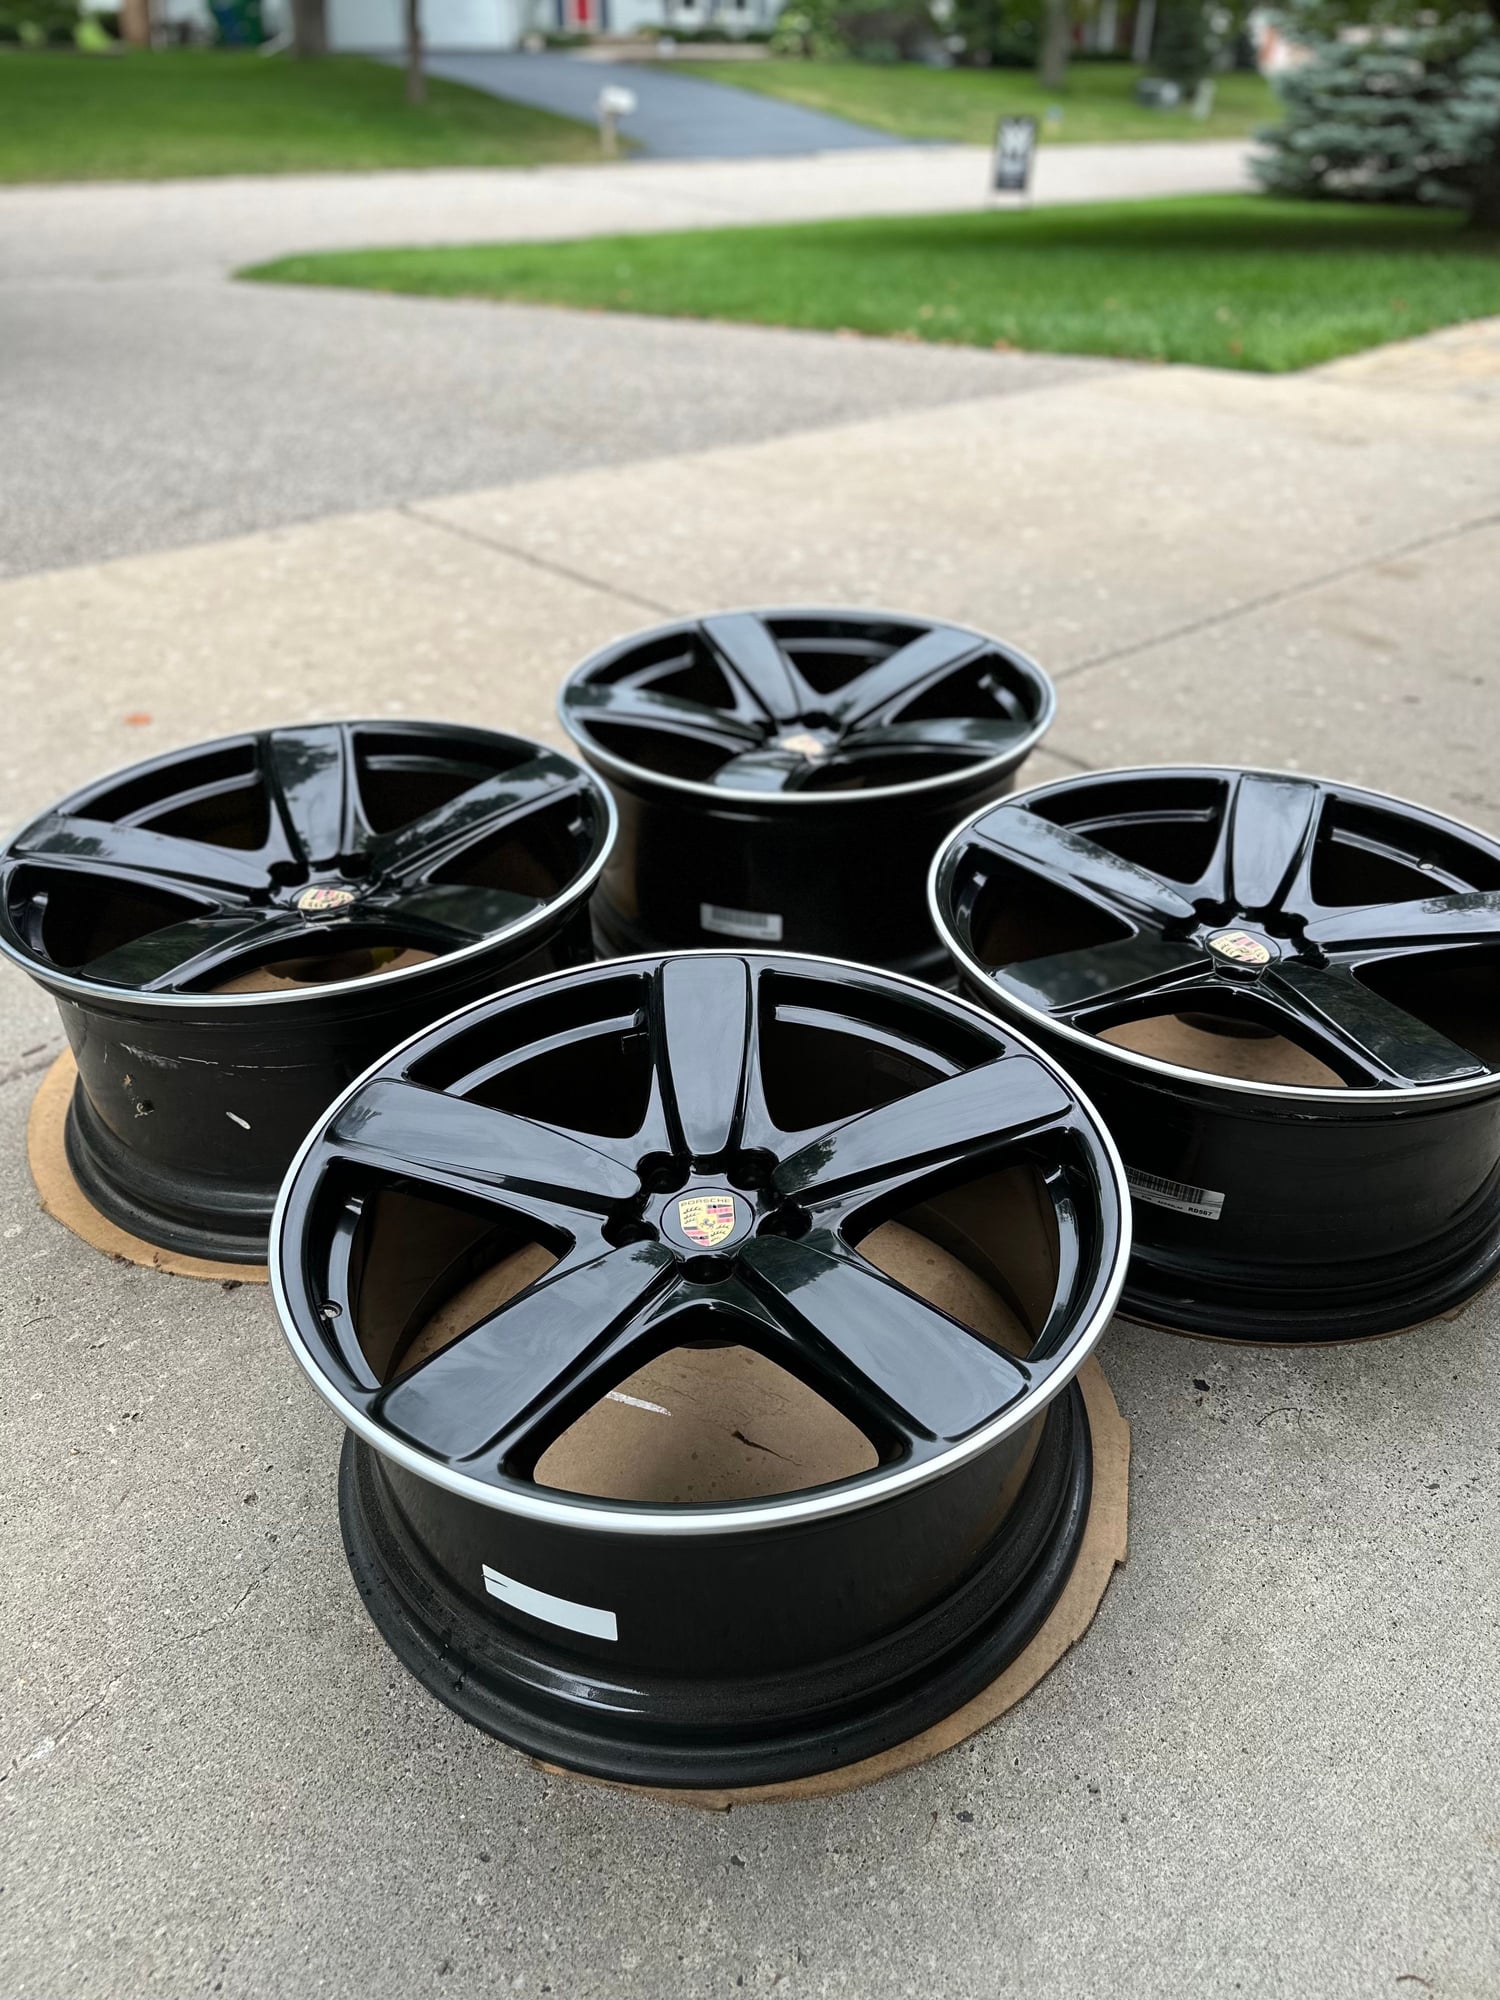 2020 Porsche Cayenne - OEM 21" Porsche Macan Sport Classic Wheels - Excellent - 95B- Black/Polished - Wheels and Tires/Axles - $3,500 - Plymouth, MN 55447, United States